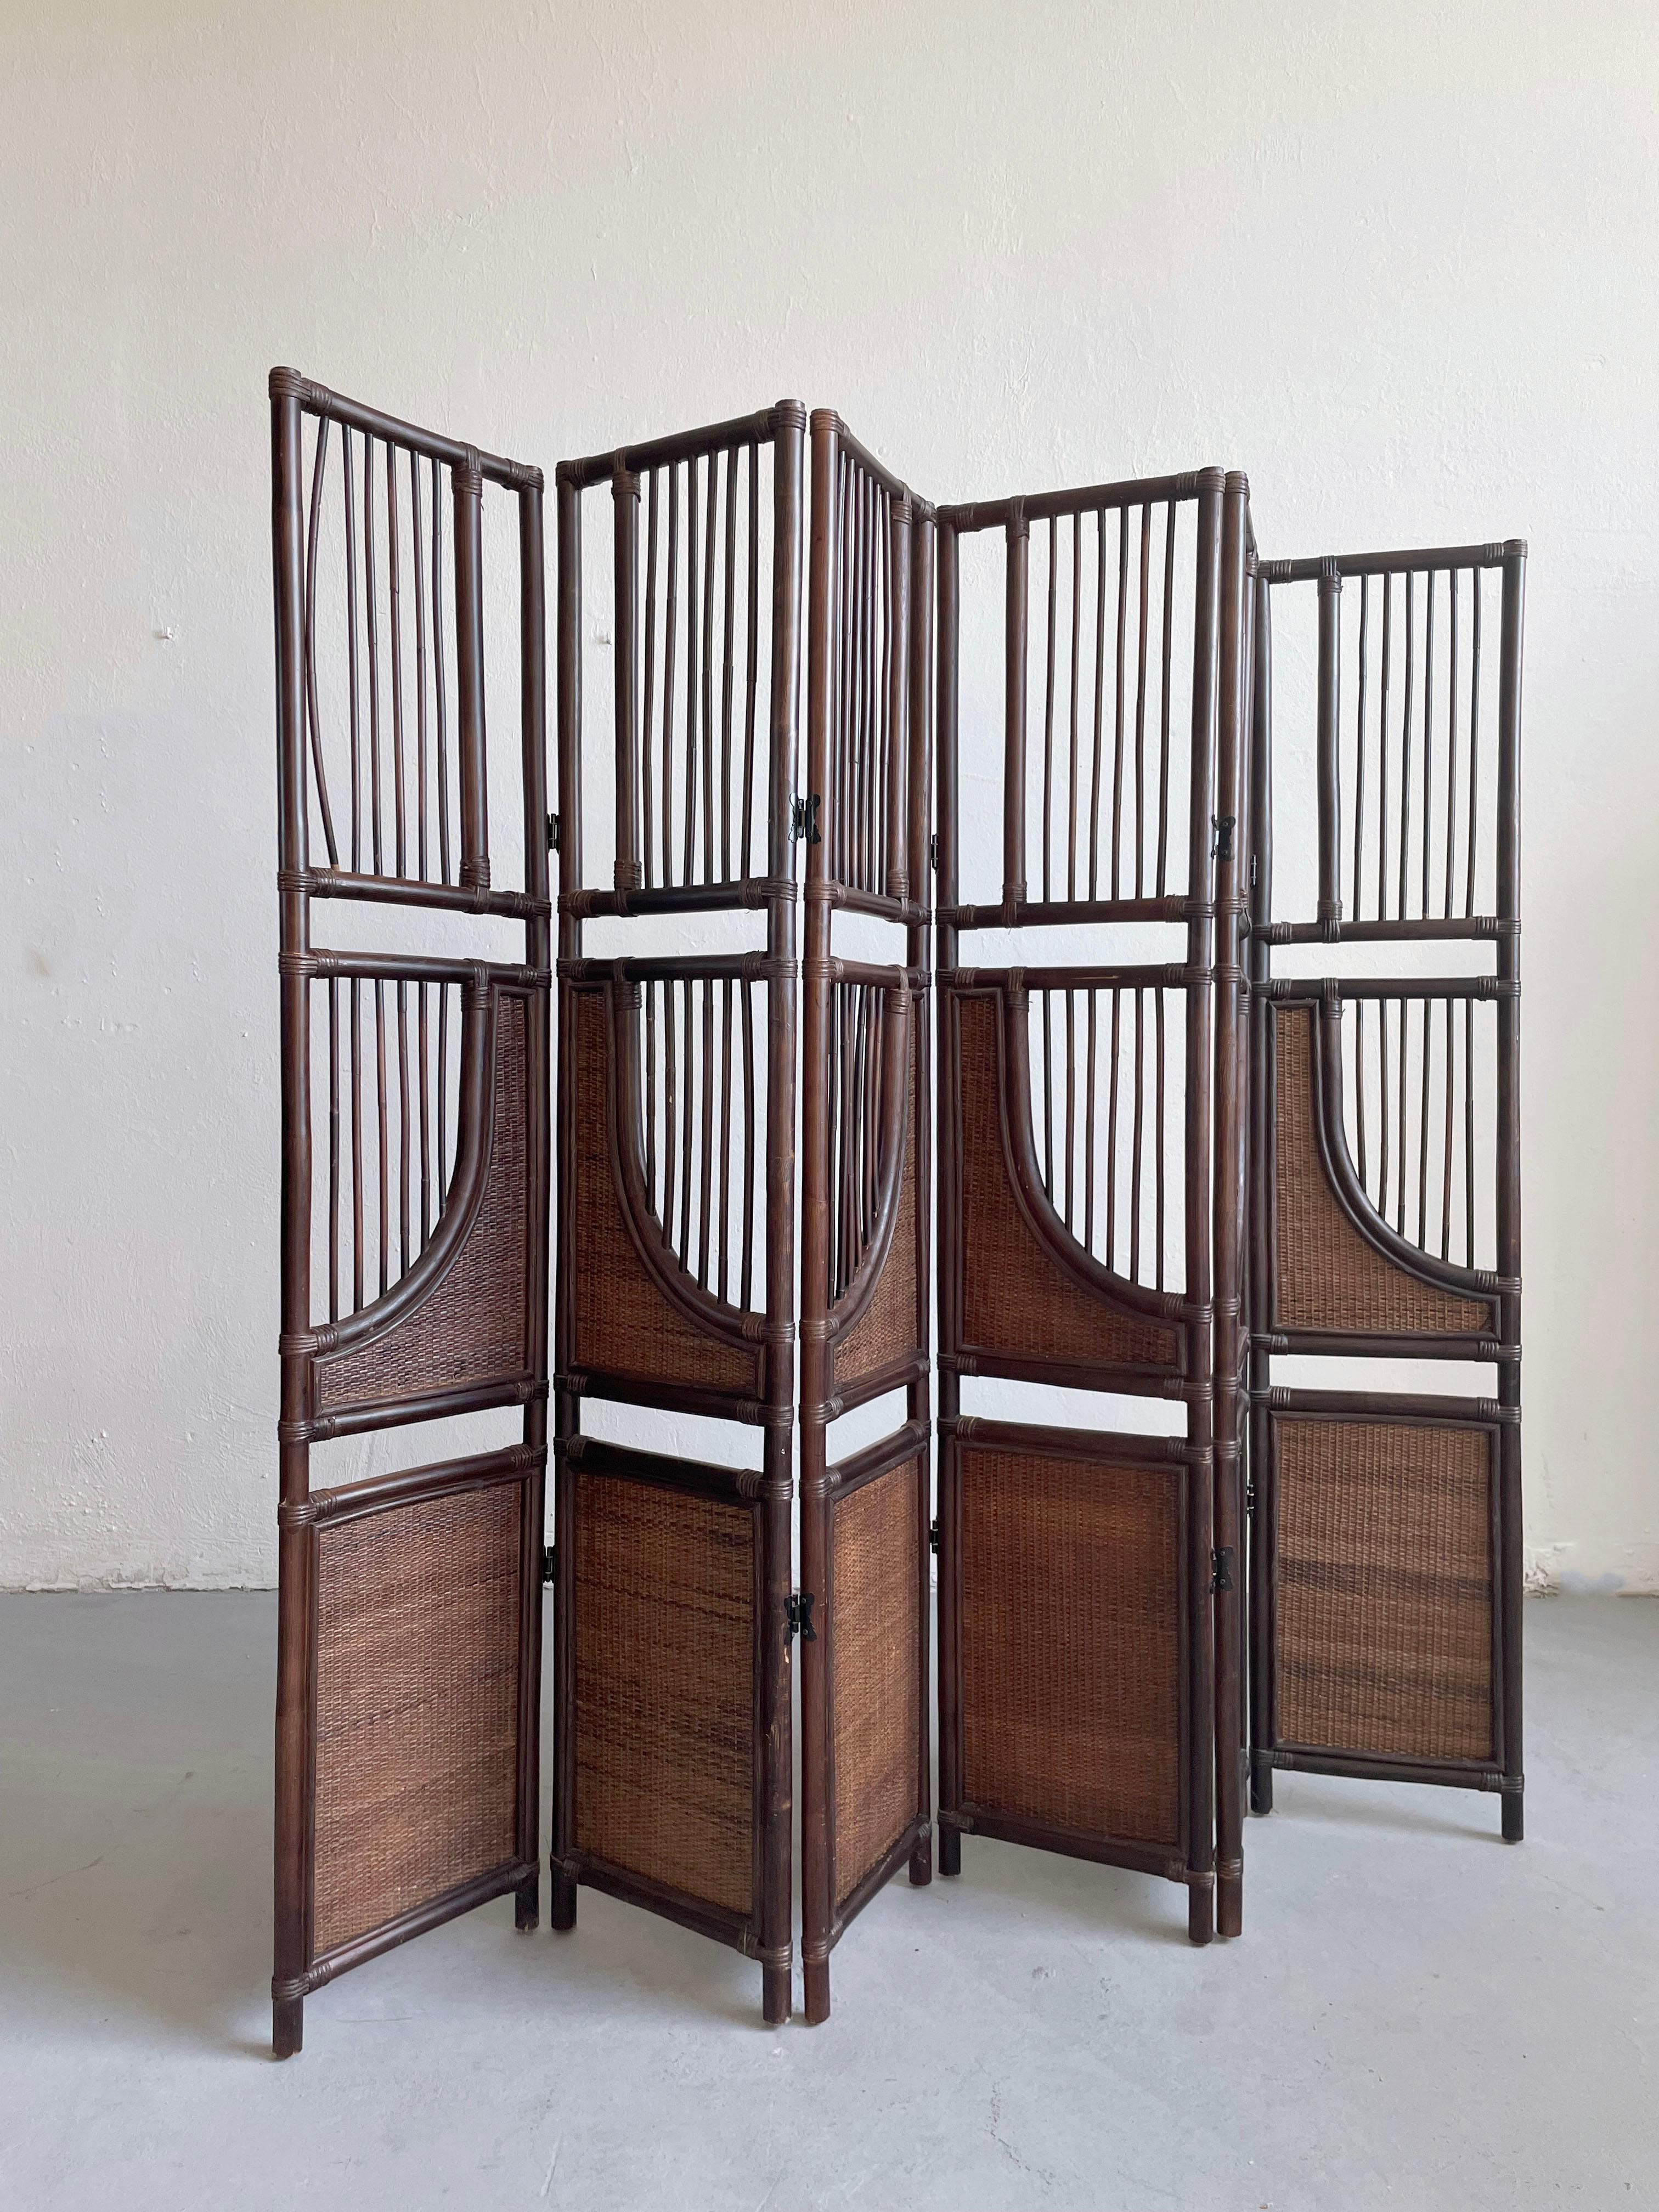 Bohemian style six wall-panel solid bamboo and rattan screen,  room divider, in chocolate dark brown finish.

Manufactured in the 1980's

Remains in a very good vintage condition, with some small traces of age and use-related cosmetic wear.
